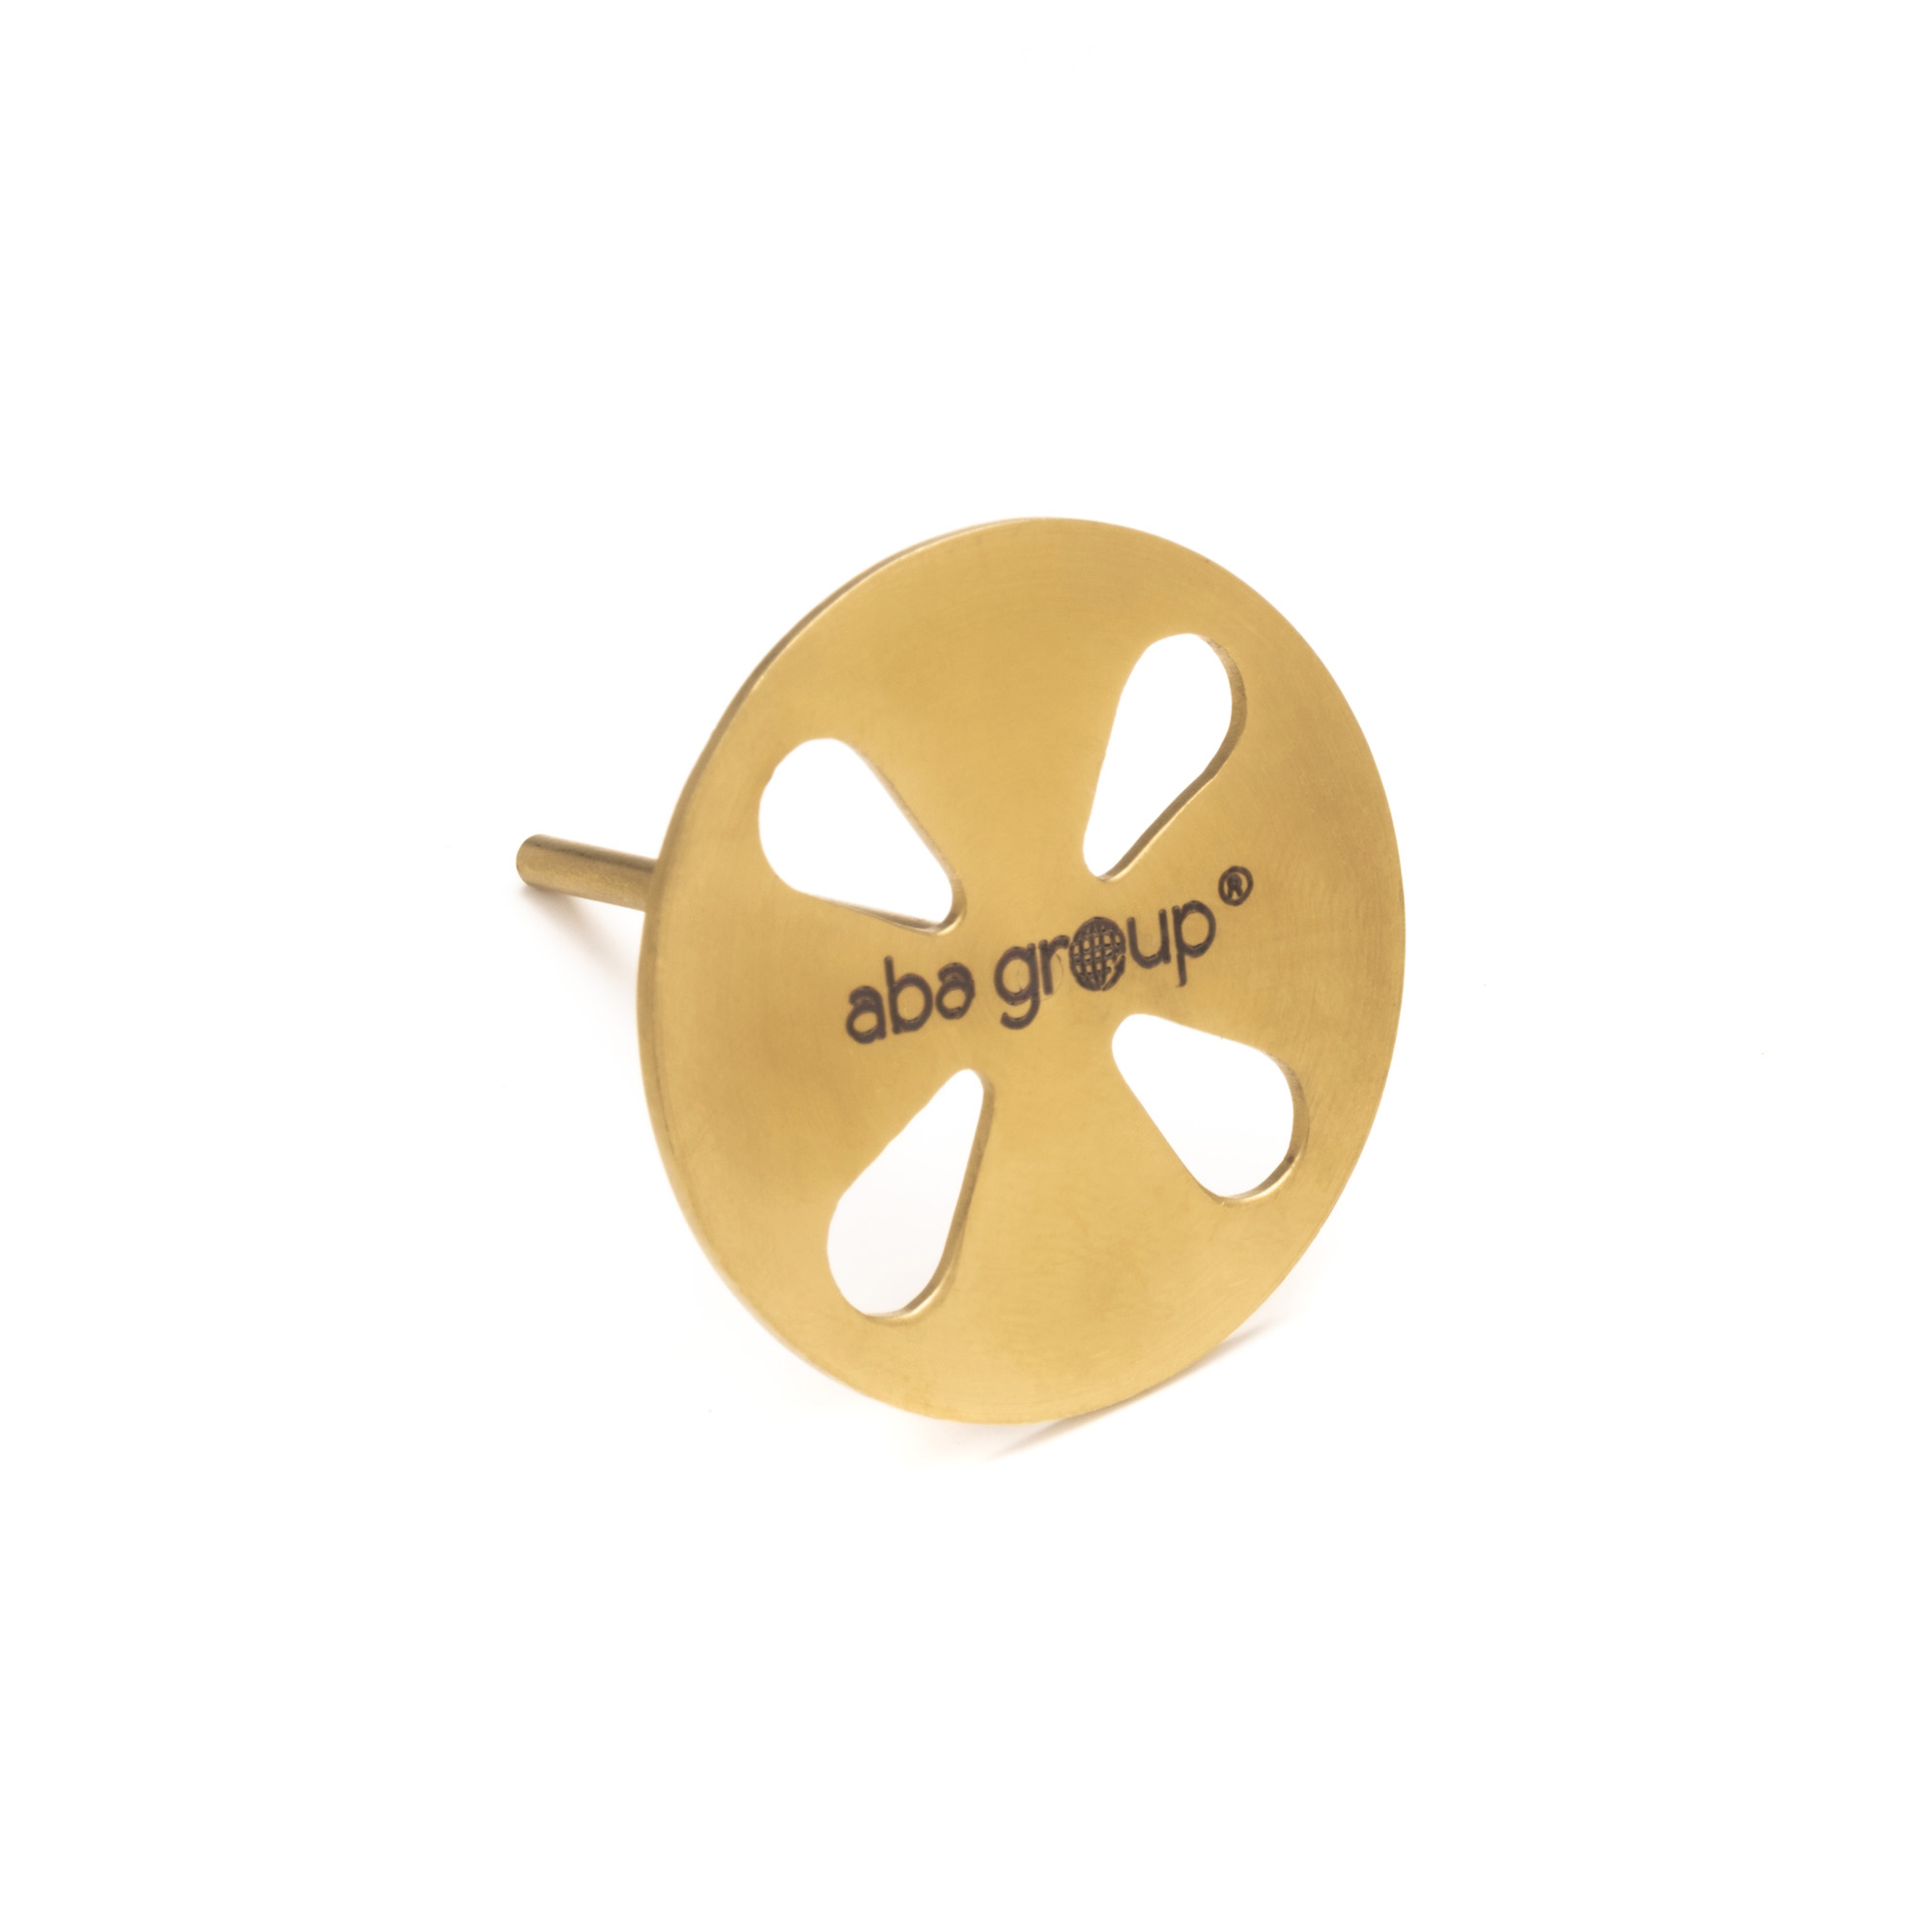 Aba Group Pododisk - Pedicure Disk 35 mm, Gold